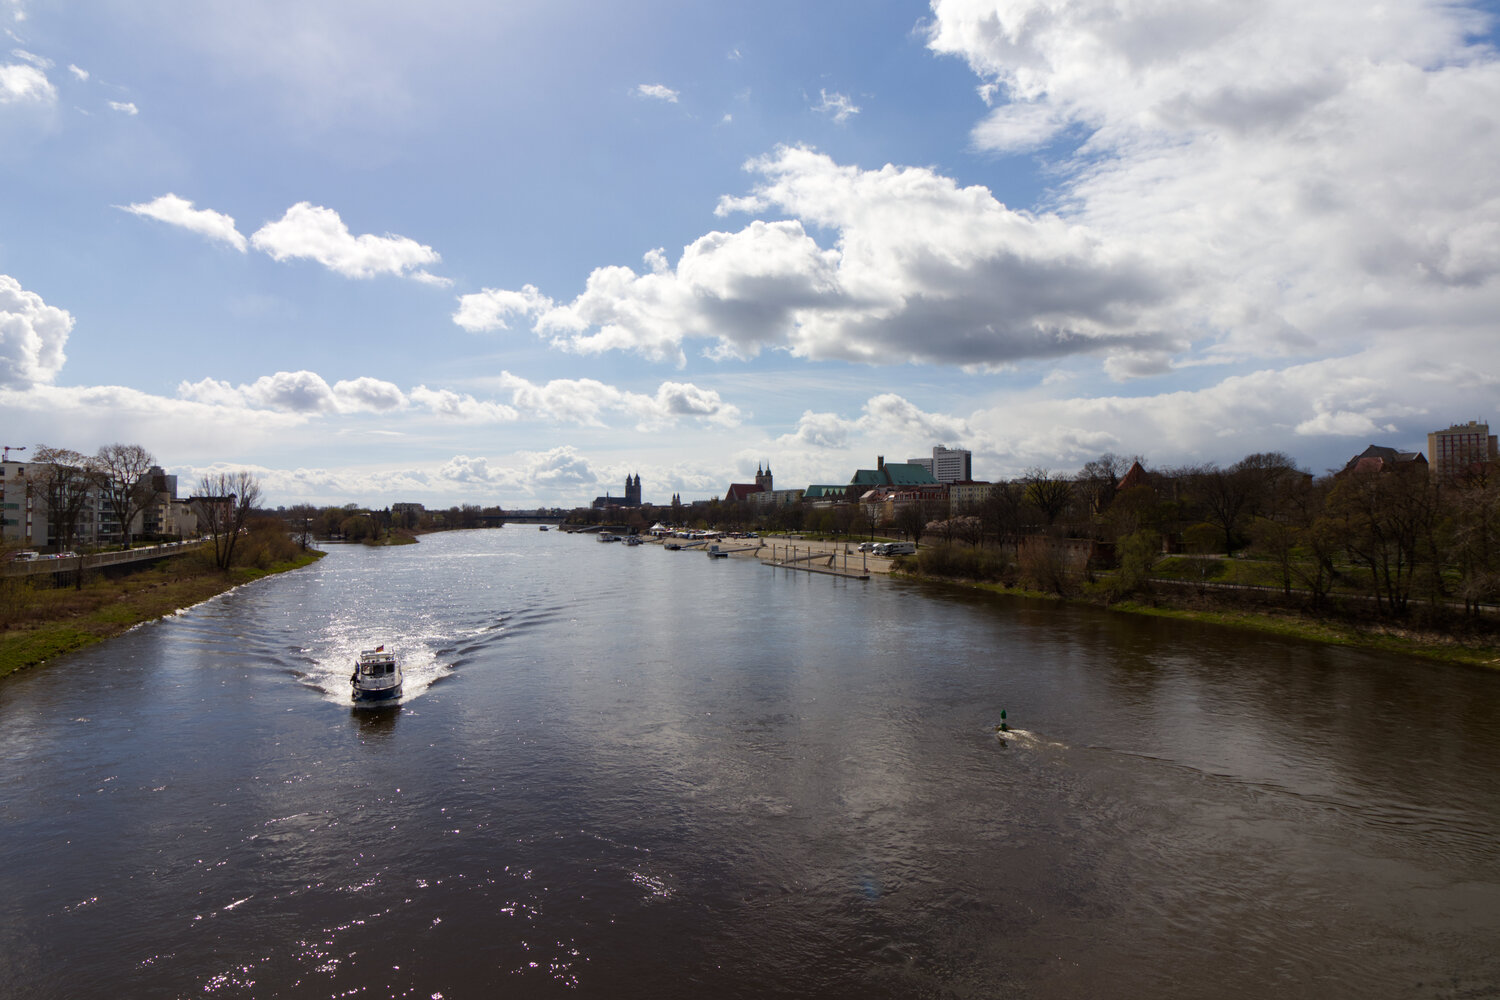 Wide view of a river with buildings on both sides. A boat approaches the camera.